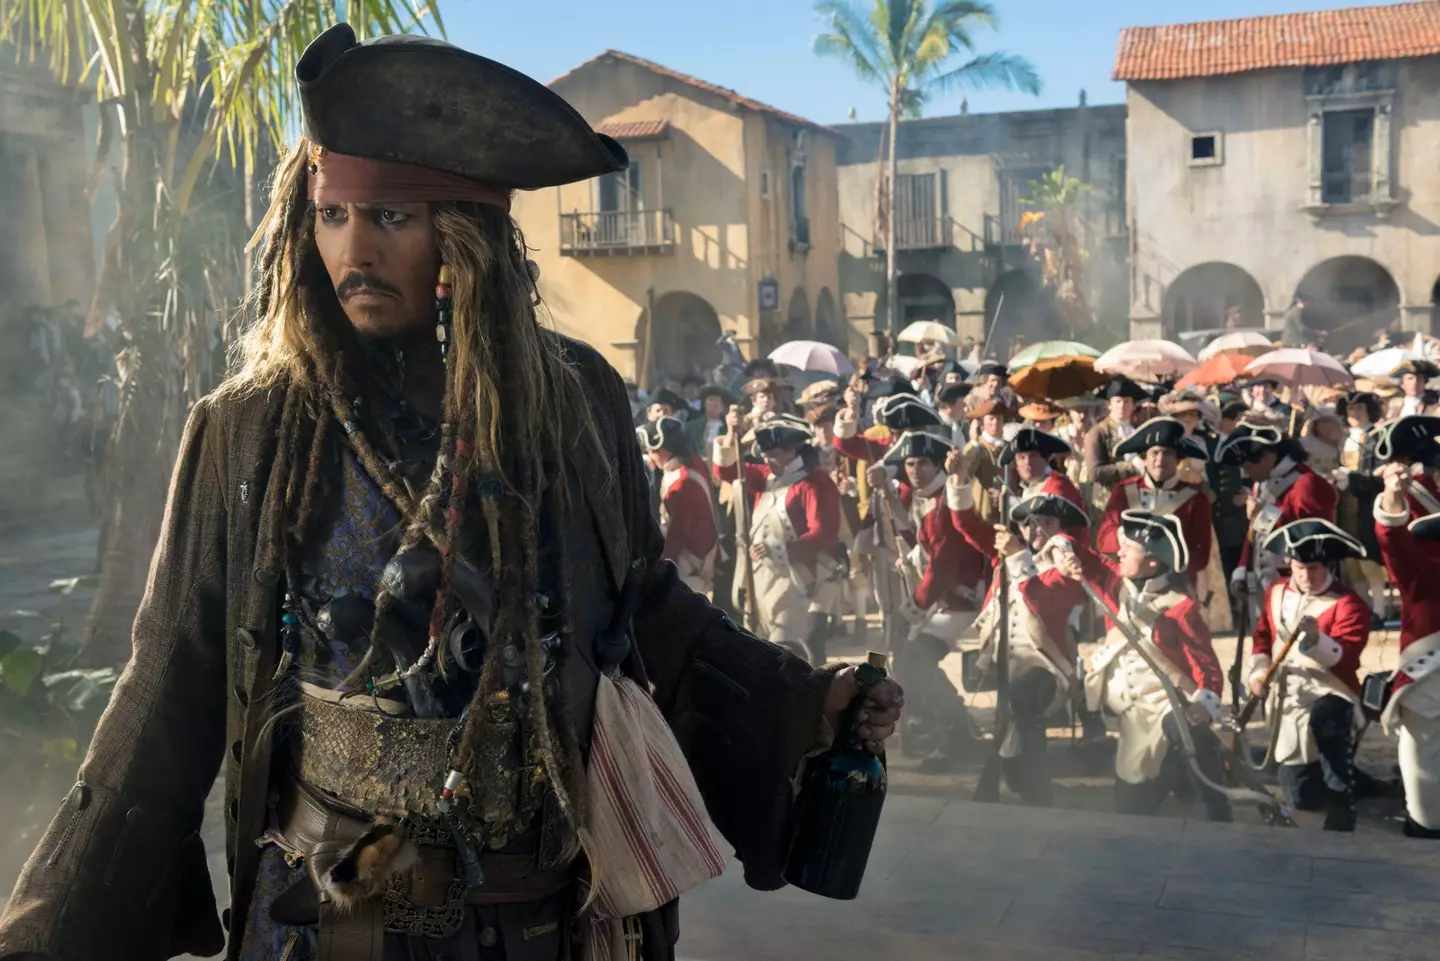 The actor has regularly appeared in character as Jack Sparrow.